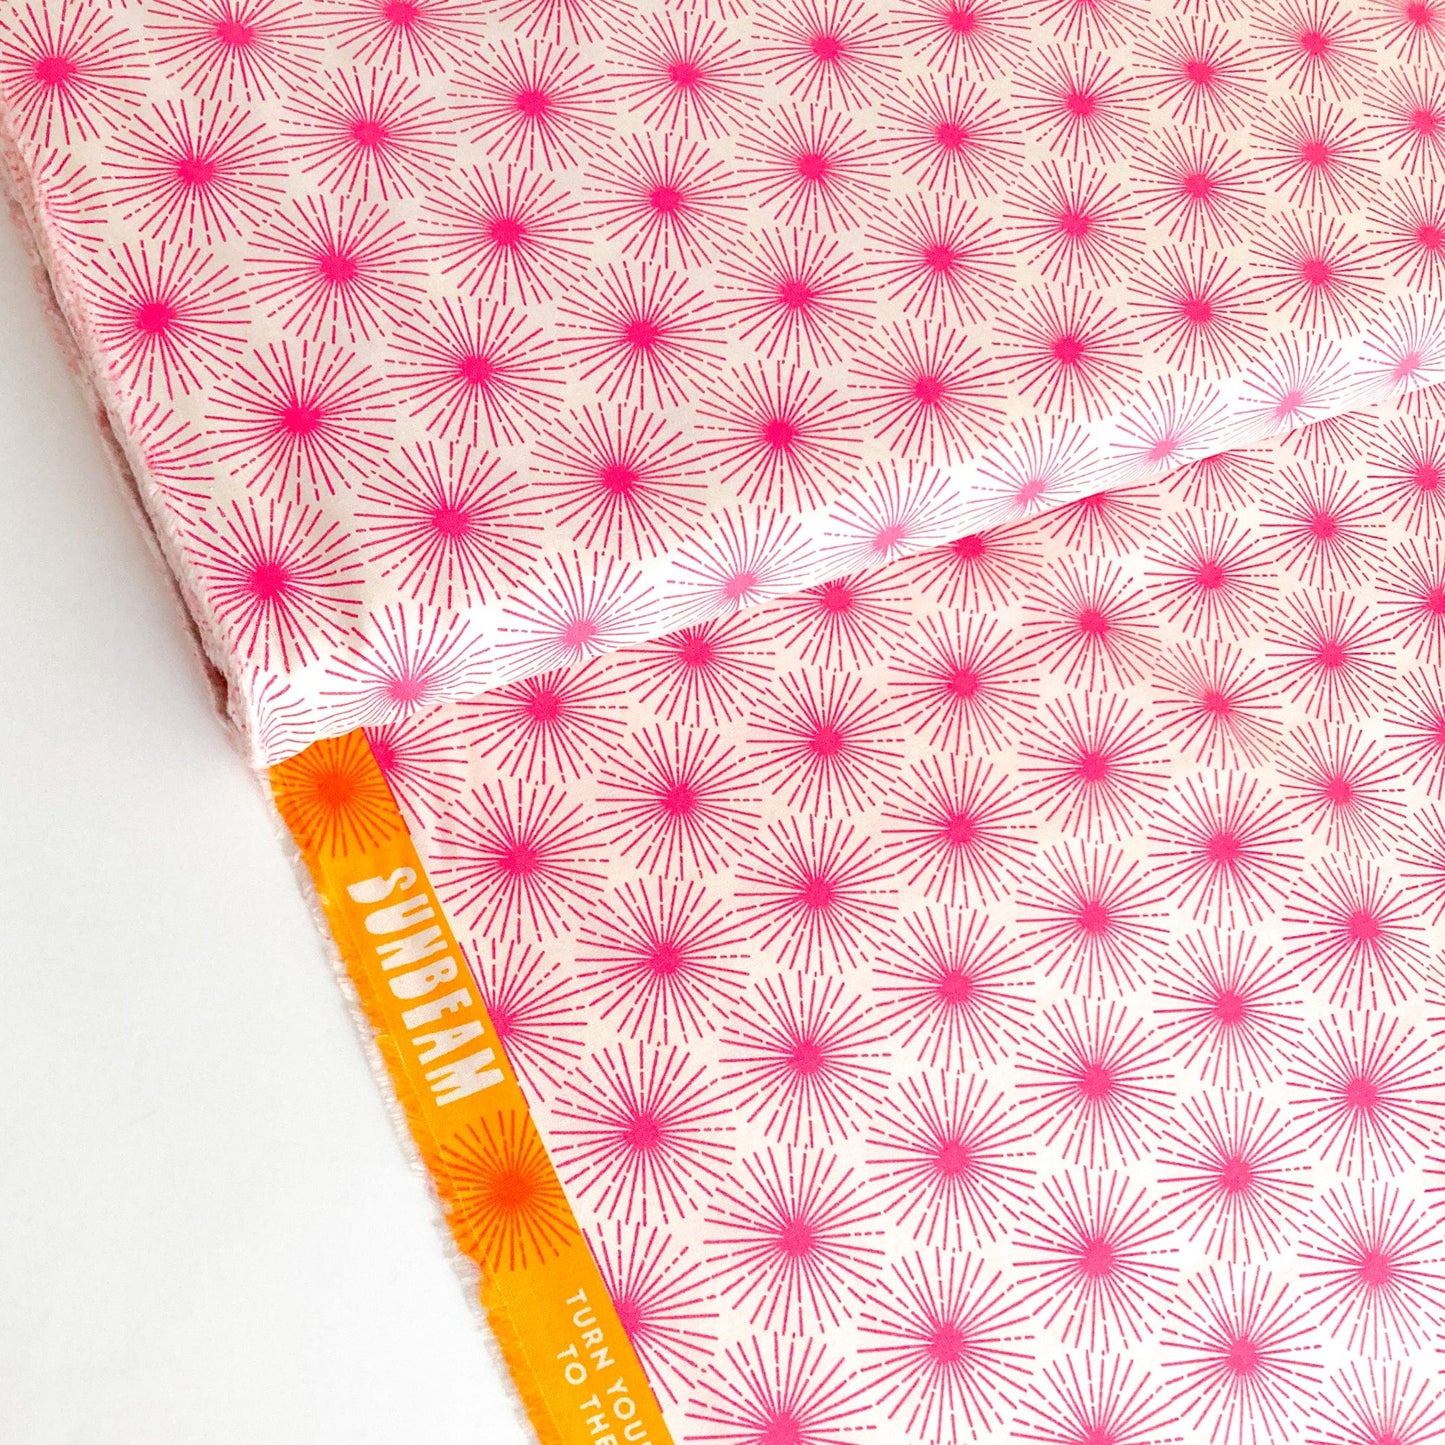 Ruby Star Society 'Sunbeam' Quilting Cotton 'Beaming' in Hot Pink